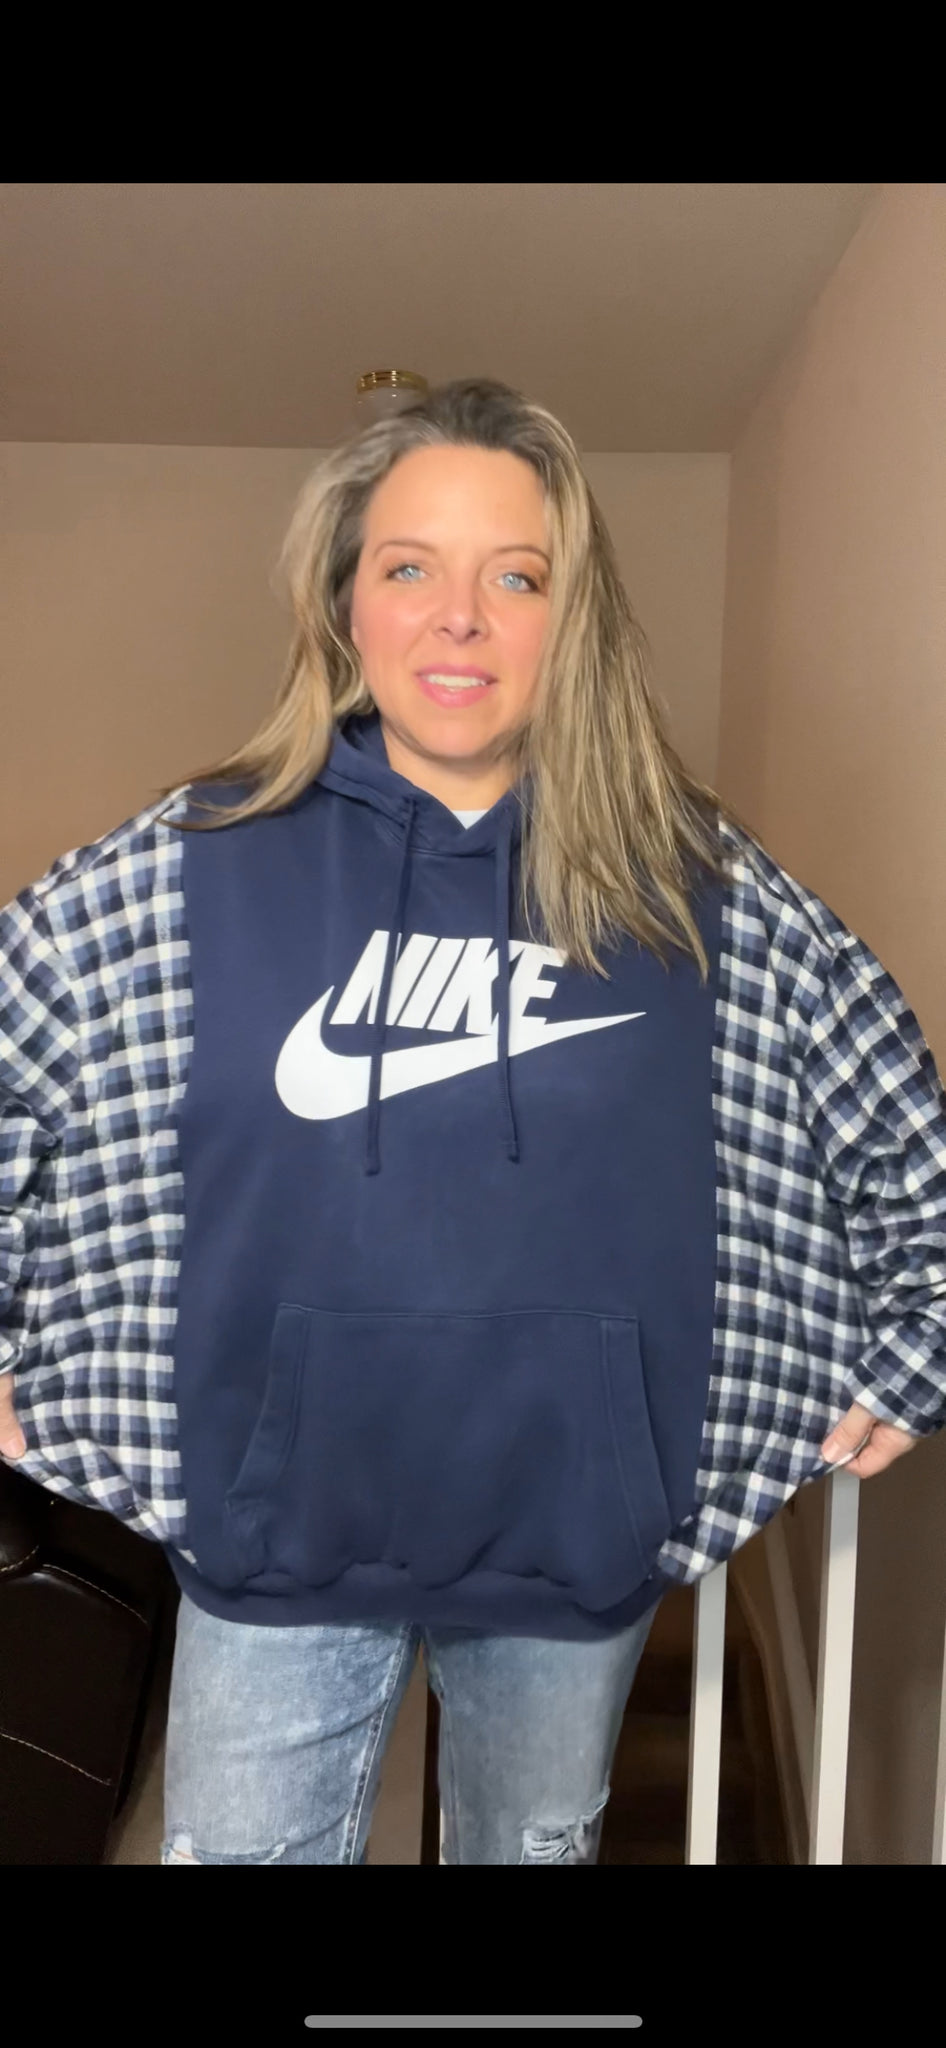 Nike - woman’s 1X - thick sweatshirt with flannel sleeves ￼